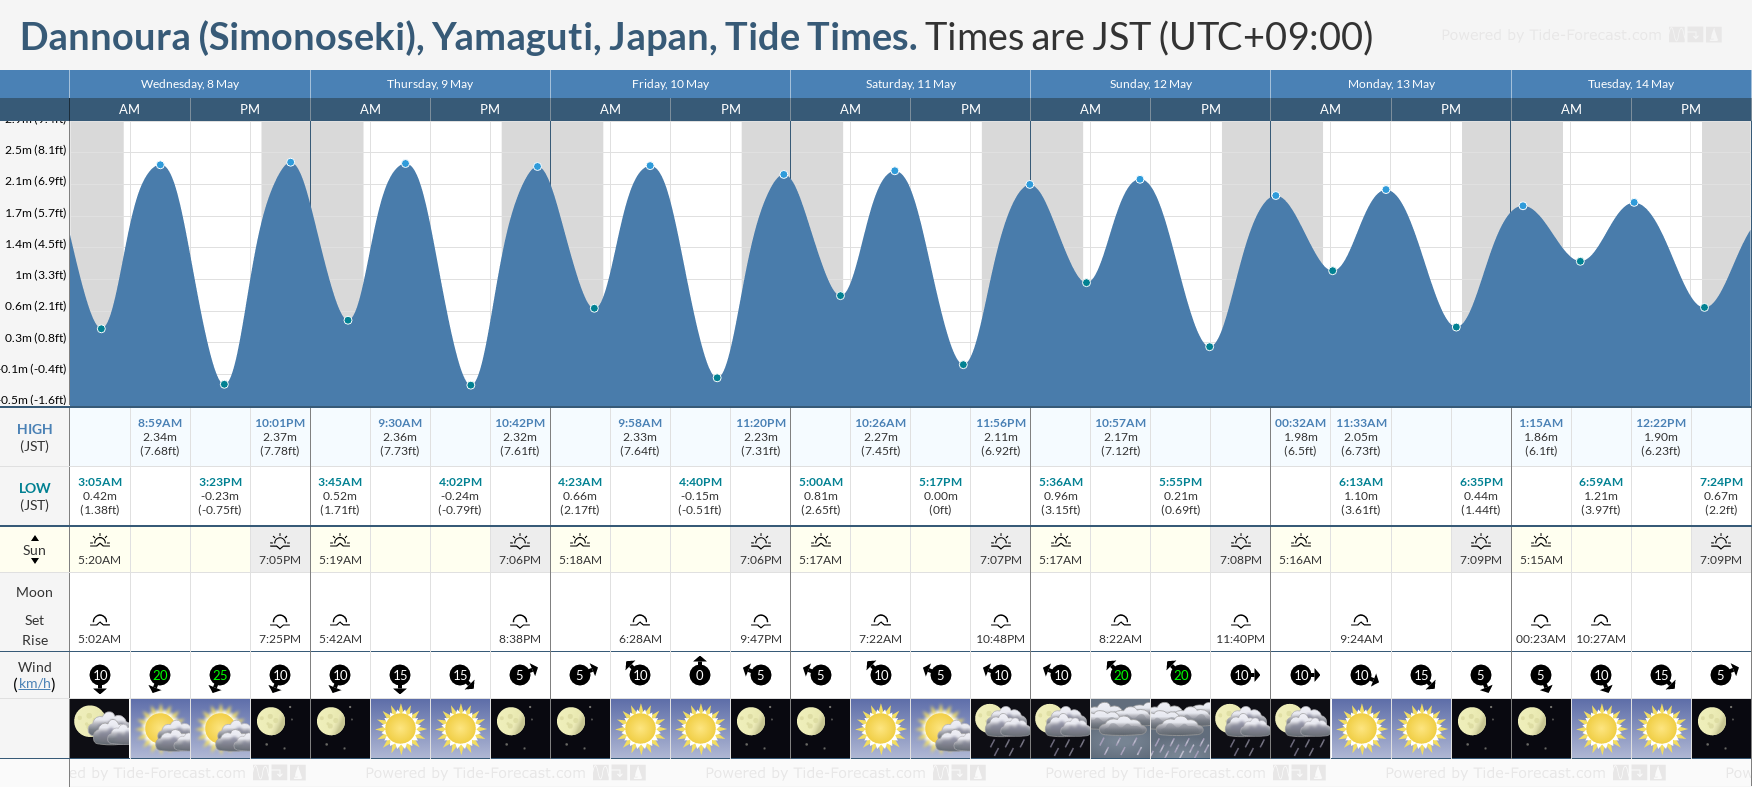 Dannoura (Simonoseki), Yamaguti, Japan Tide Chart including high and low tide tide times for the next 7 days